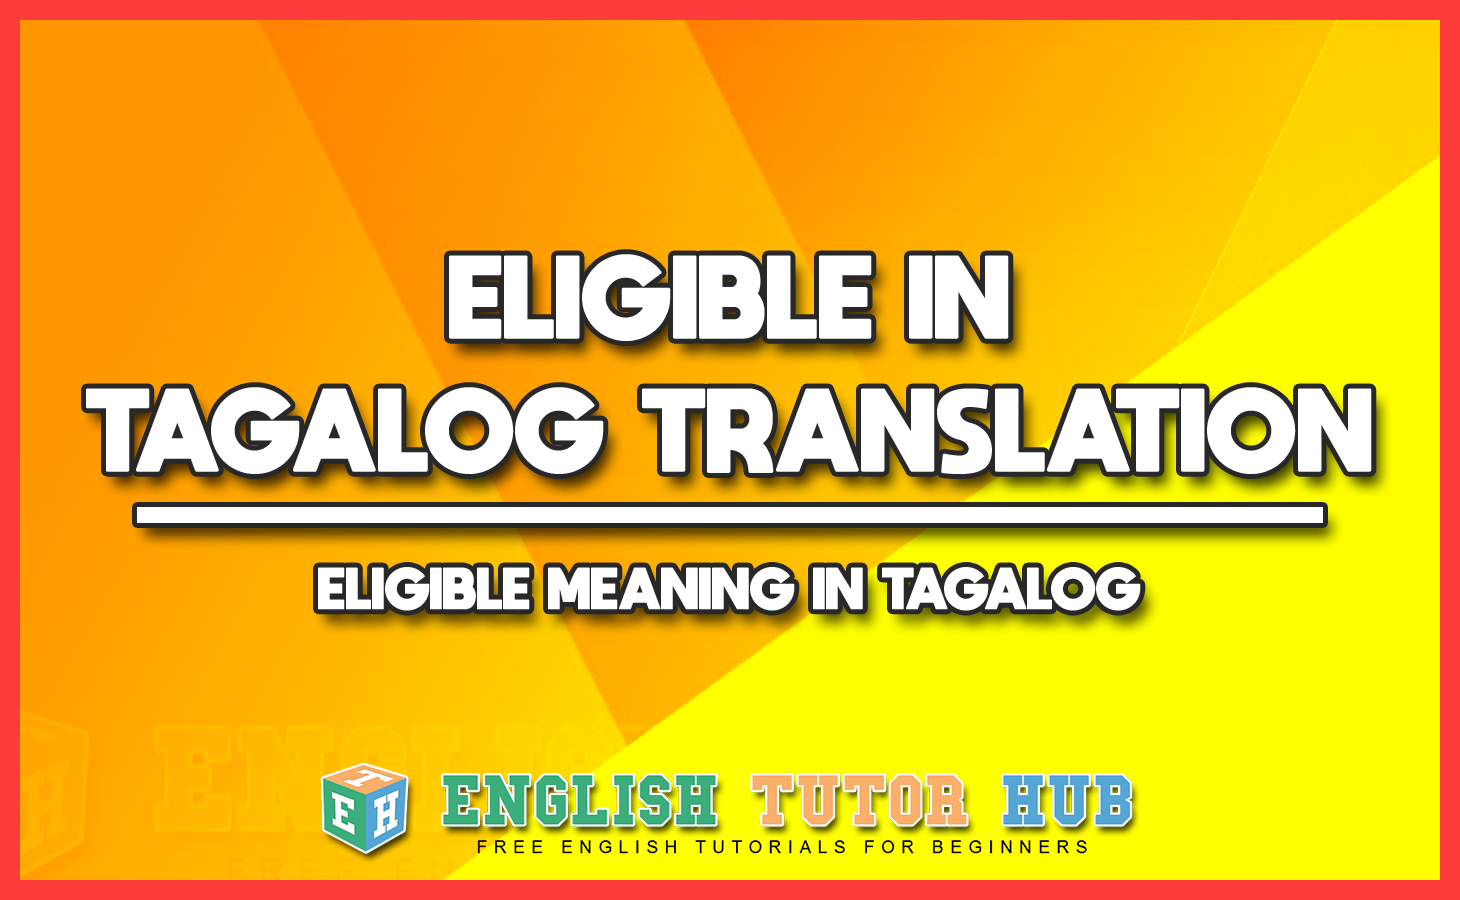 ELIGIBLE IN TAGALOG TRANSLATION - ELIGIBLE MEANING IN TAGALOG